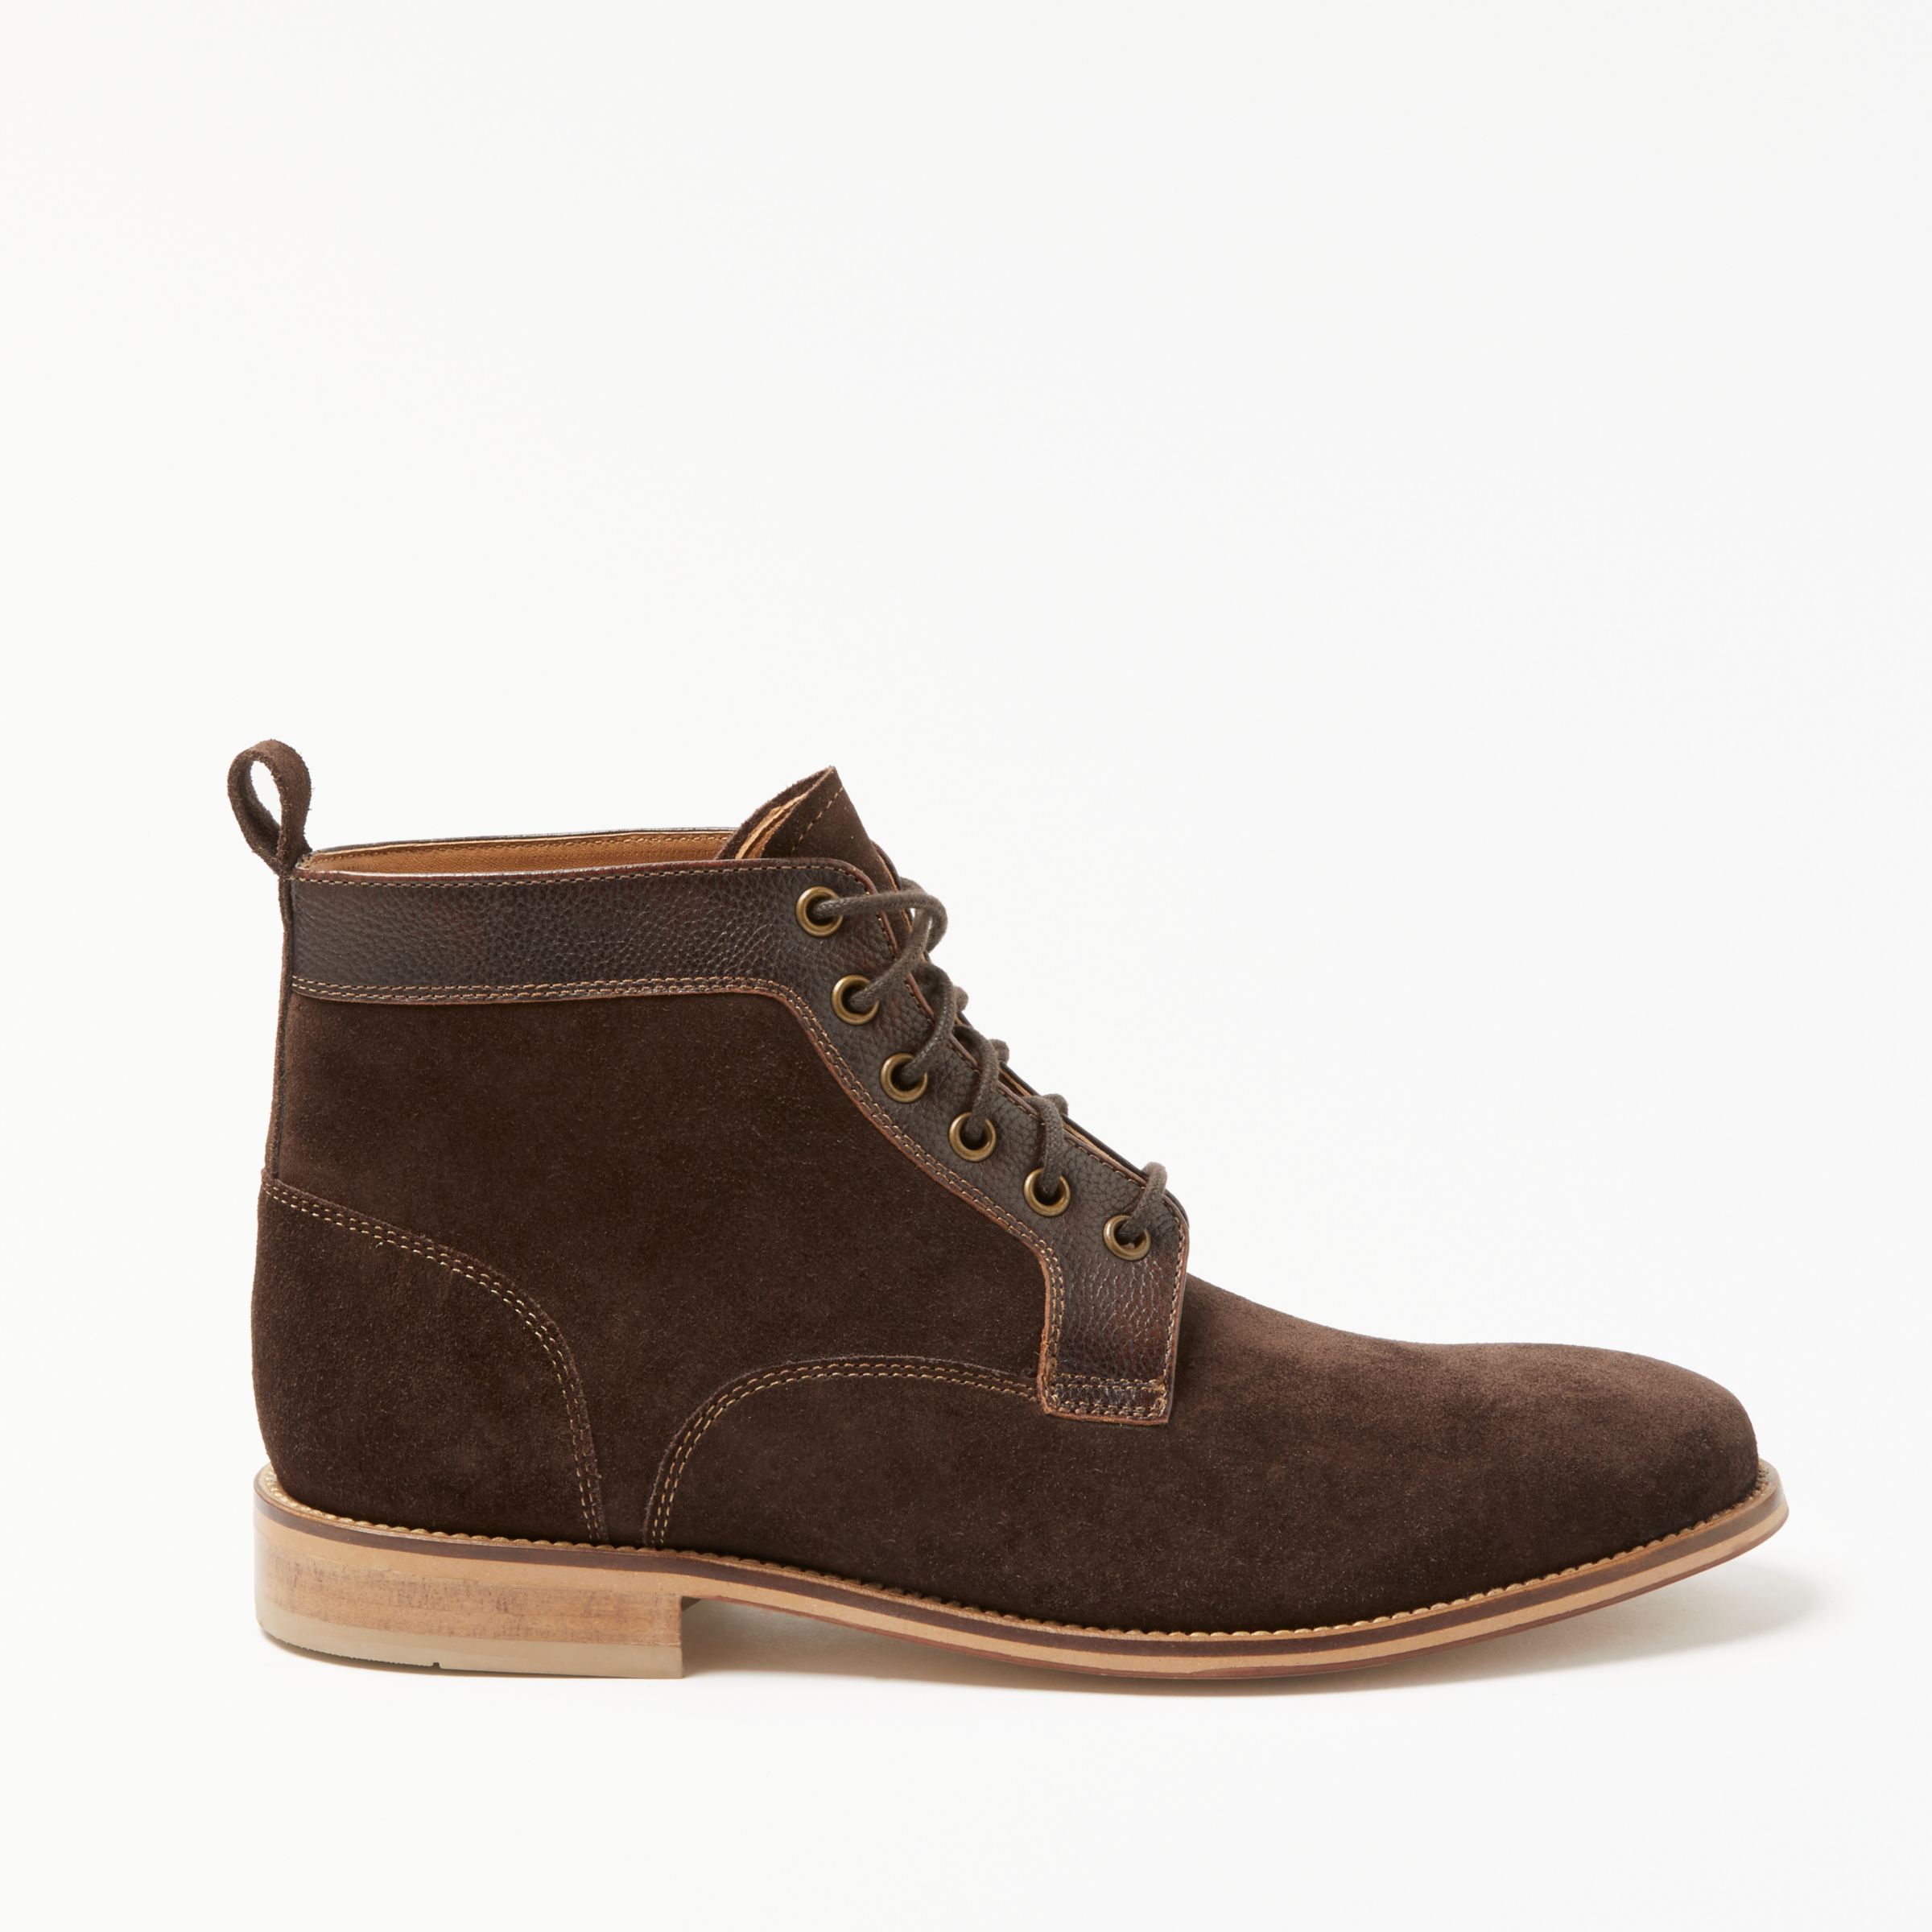 John Lewis Suede and Leather Boots Reviews